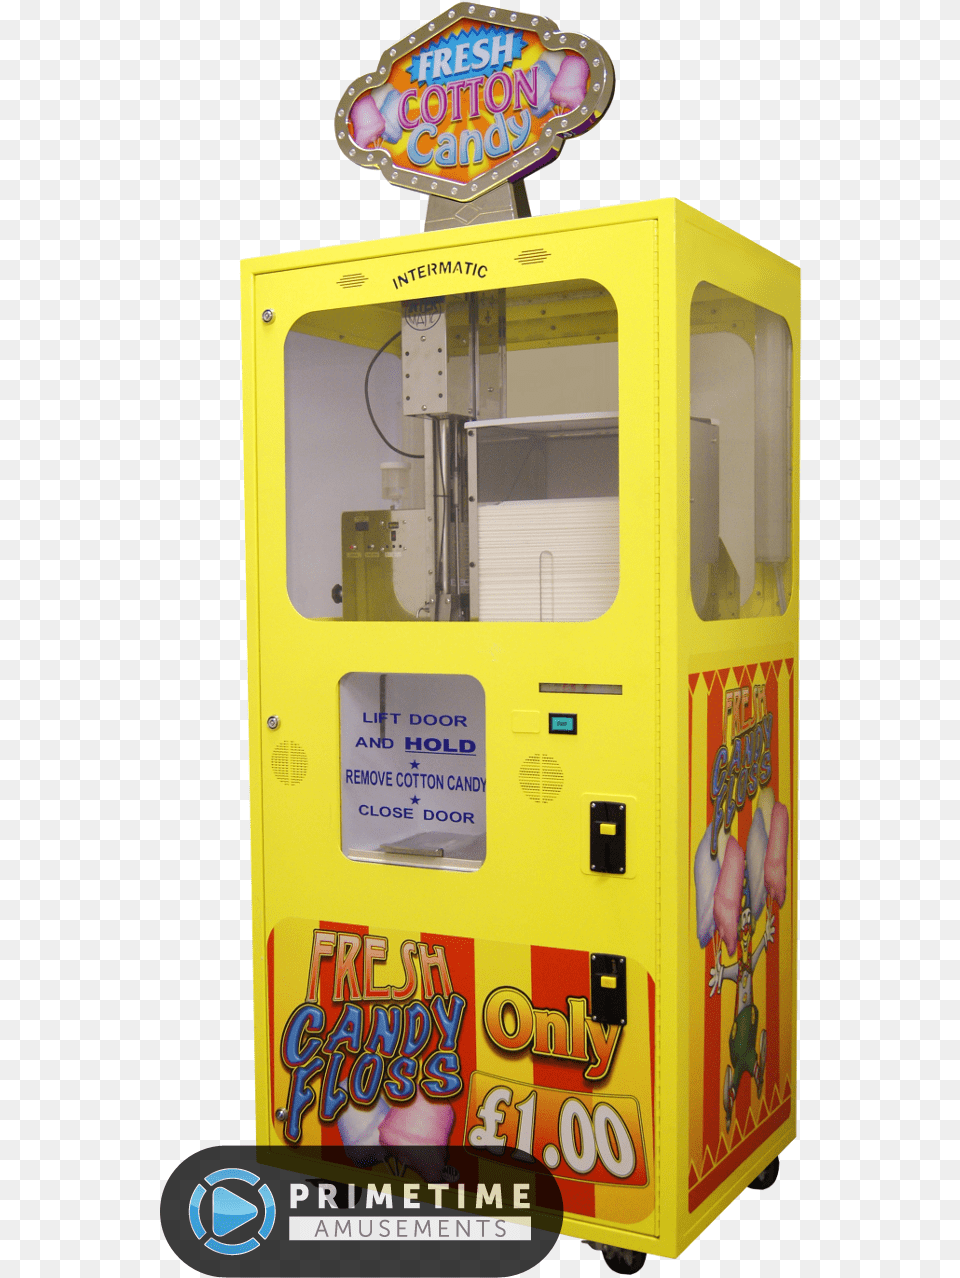 Cotton Candy Floss Vending Machine For Sale, Kiosk, Vending Machine Free Png Download